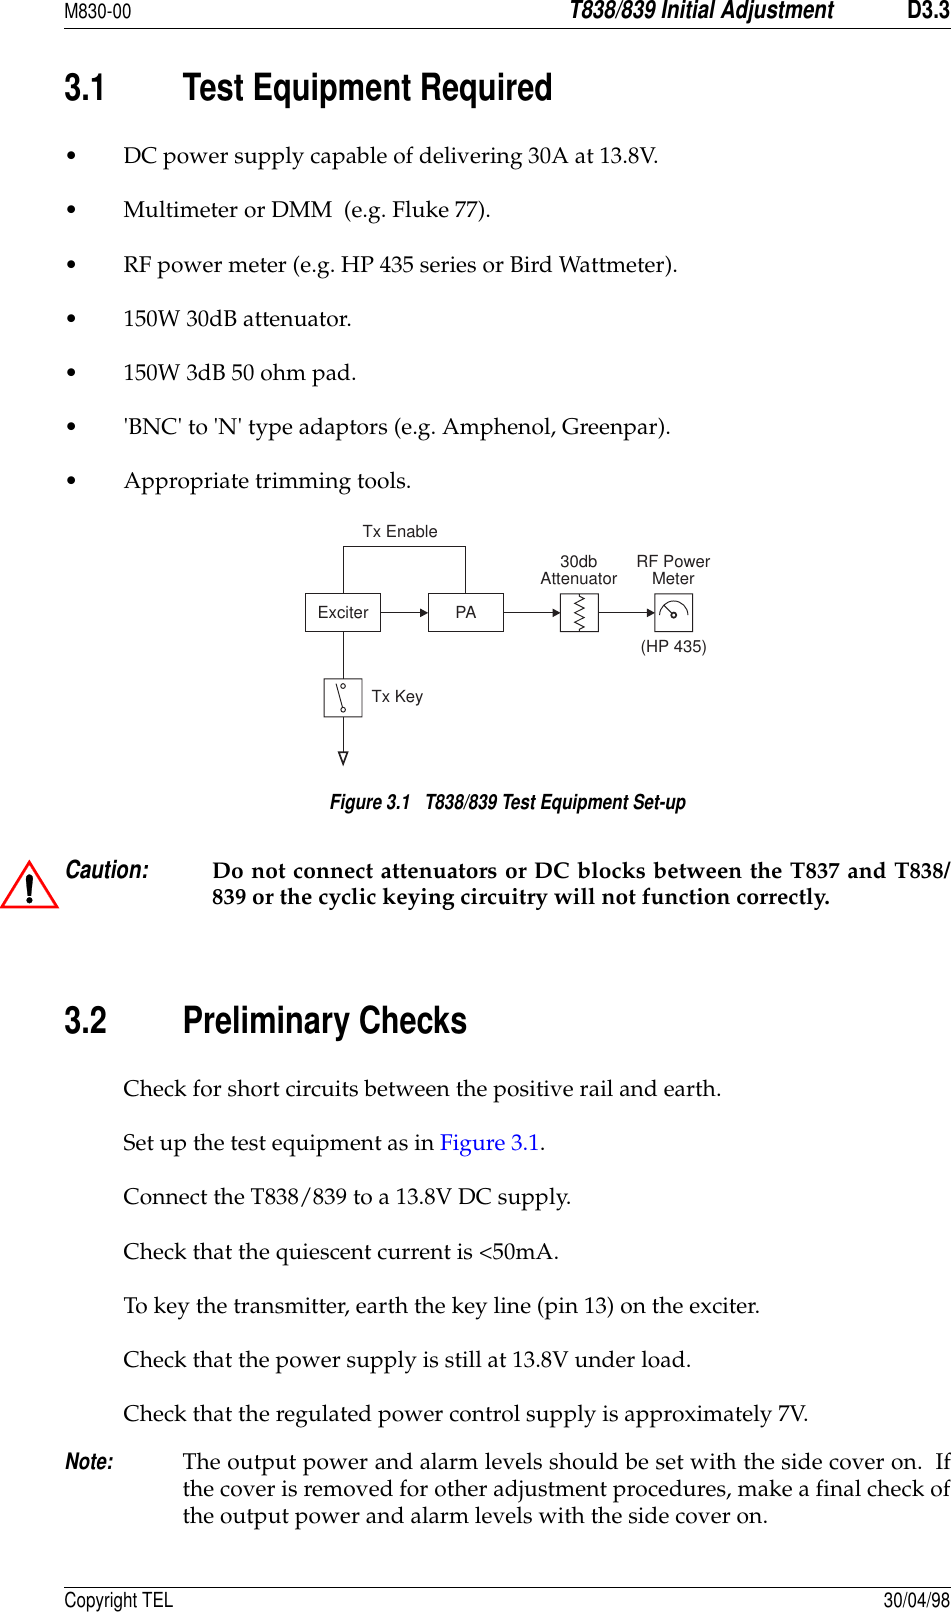 M830-00T838/839 Initial AdjustmentD3.3Copyright TEL 30/04/983.1 Test Equipment Required• DC power supply capable of delivering 30A at 13.8V.• Multimeter or DMM  (e.g. Fluke 77).• RF power meter (e.g. HP 435 series or Bird Wattmeter). • 150W 30dB attenuator. • 150W 3dB 50 ohm pad. • &apos;BNC&apos; to &apos;N&apos; type adaptors (e.g. Amphenol, Greenpar). • Appropriate trimming tools. Figure 3.1   T838/839 Test Equipment Set-upCaution:Do not connect attenuators or DC blocks between the T837 and T838/839 or the cyclic keying circuitry will not function correctly.3.2 Preliminary ChecksCheck for short circuits between the positive rail and earth.Set up the test equipment as in Figure 3.1.Connect the T838/839 to a 13.8V DC supply.Check that the quiescent current is &lt;50mA.To key the transmitter, earth the key line (pin 13) on the exciter.Check that the power supply is still at 13.8V under load.Check that the regulated power control supply is approximately 7V.Note:The output power and alarm levels should be set with the side cover on.  Ifthe cover is removed for other adjustment procedures, make a final check ofthe output power and alarm levels with the side cover on.Exciter PATx KeyRF PowerMeterTx Enable30dbAttenuator(HP 435)